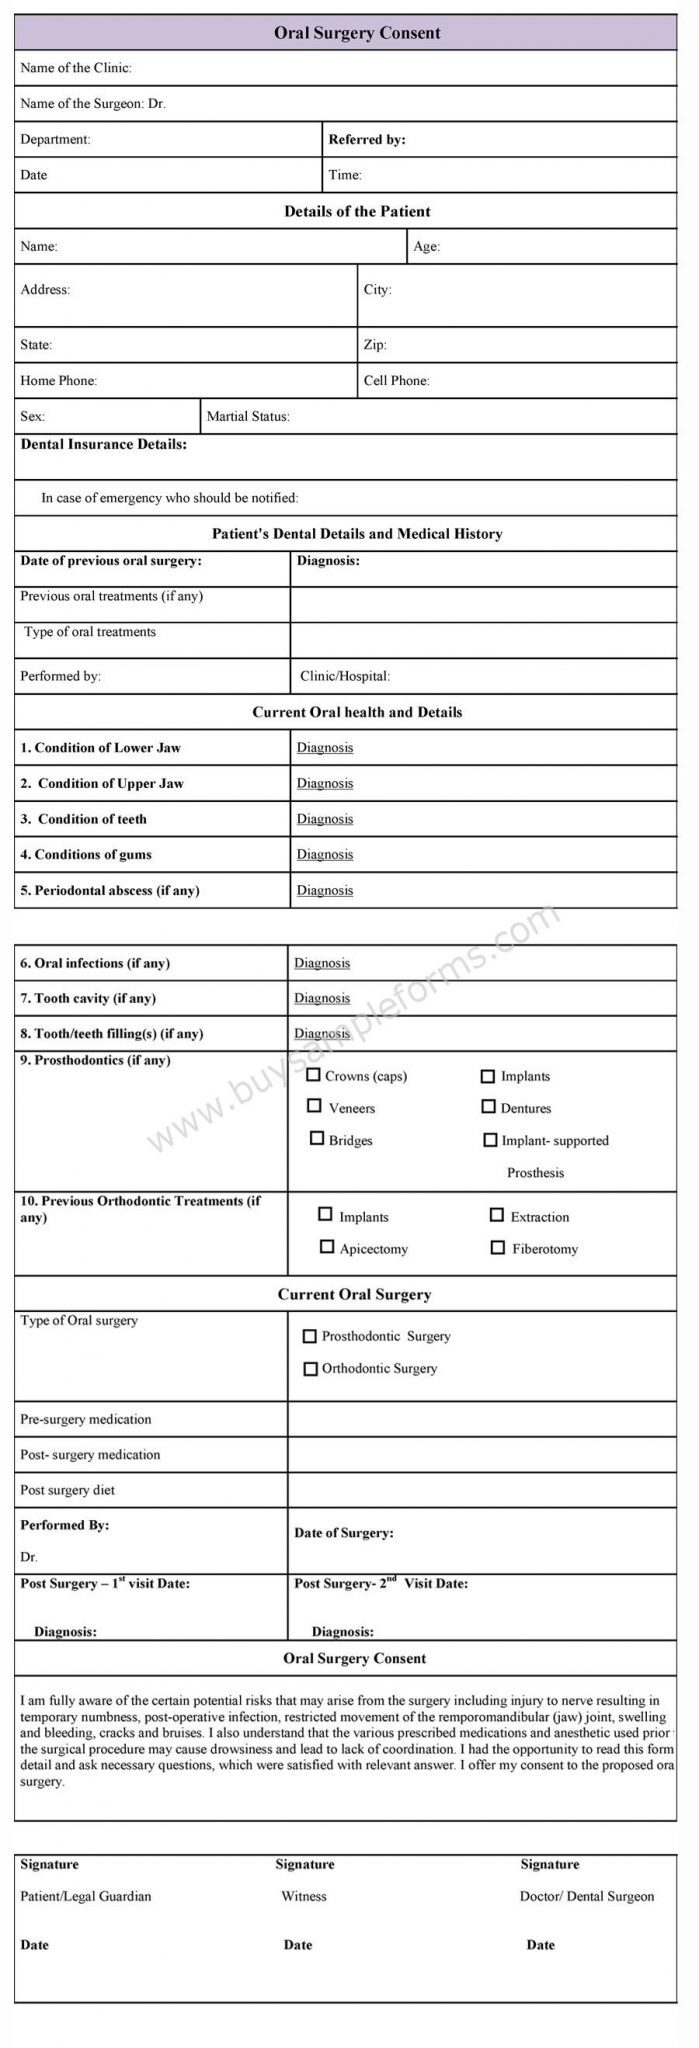 Oral Surgery Consent Form Sample Forms